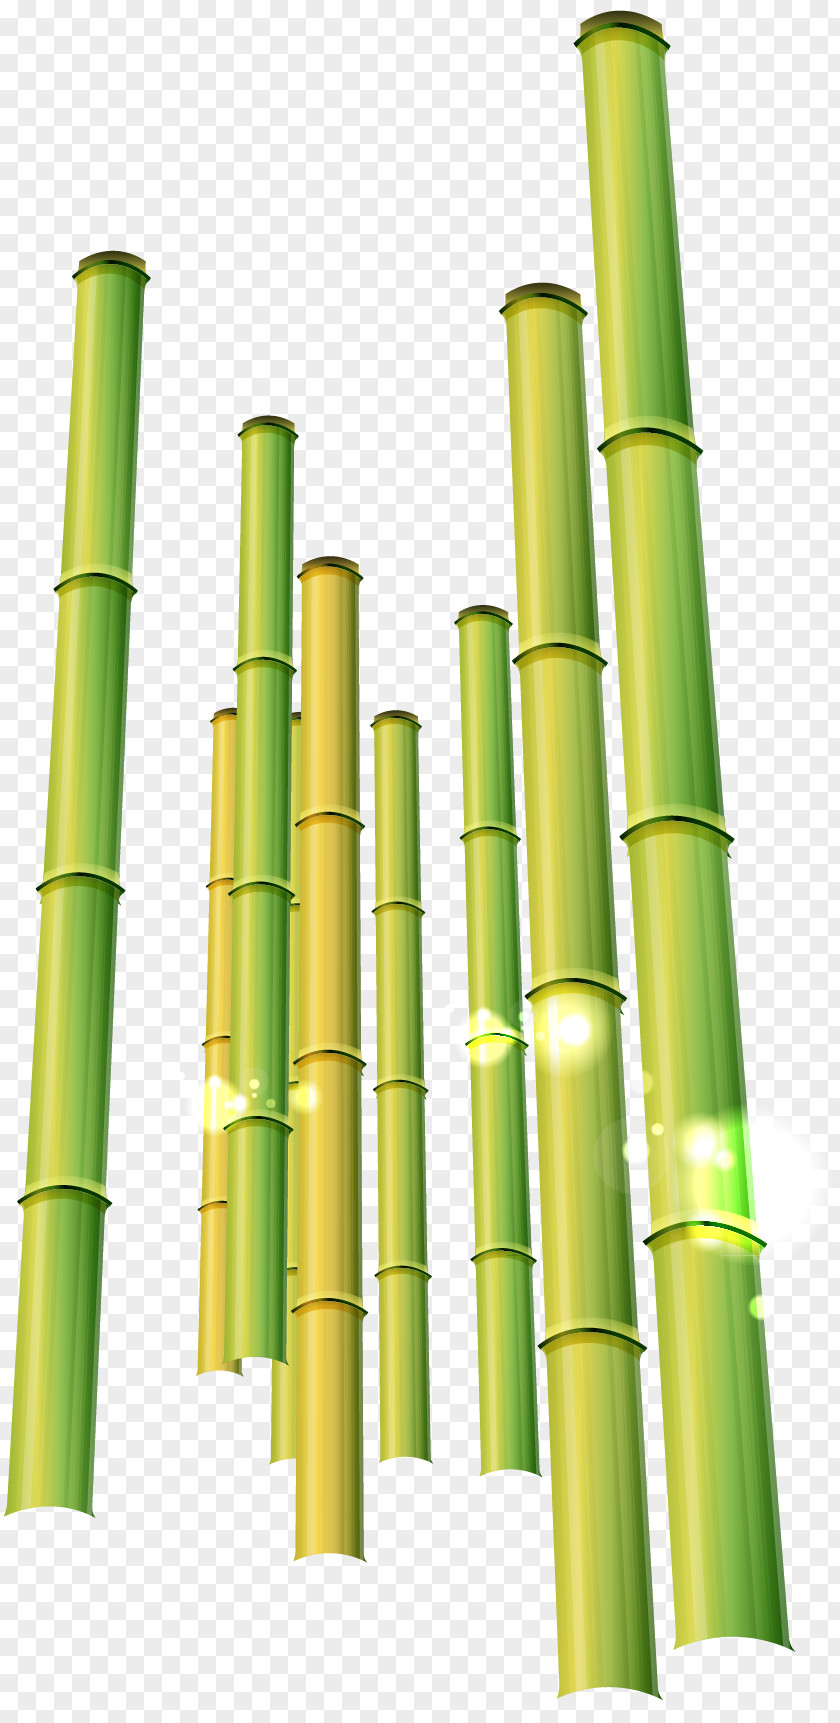 Green Bamboo Pattern Material Clip Art PNG